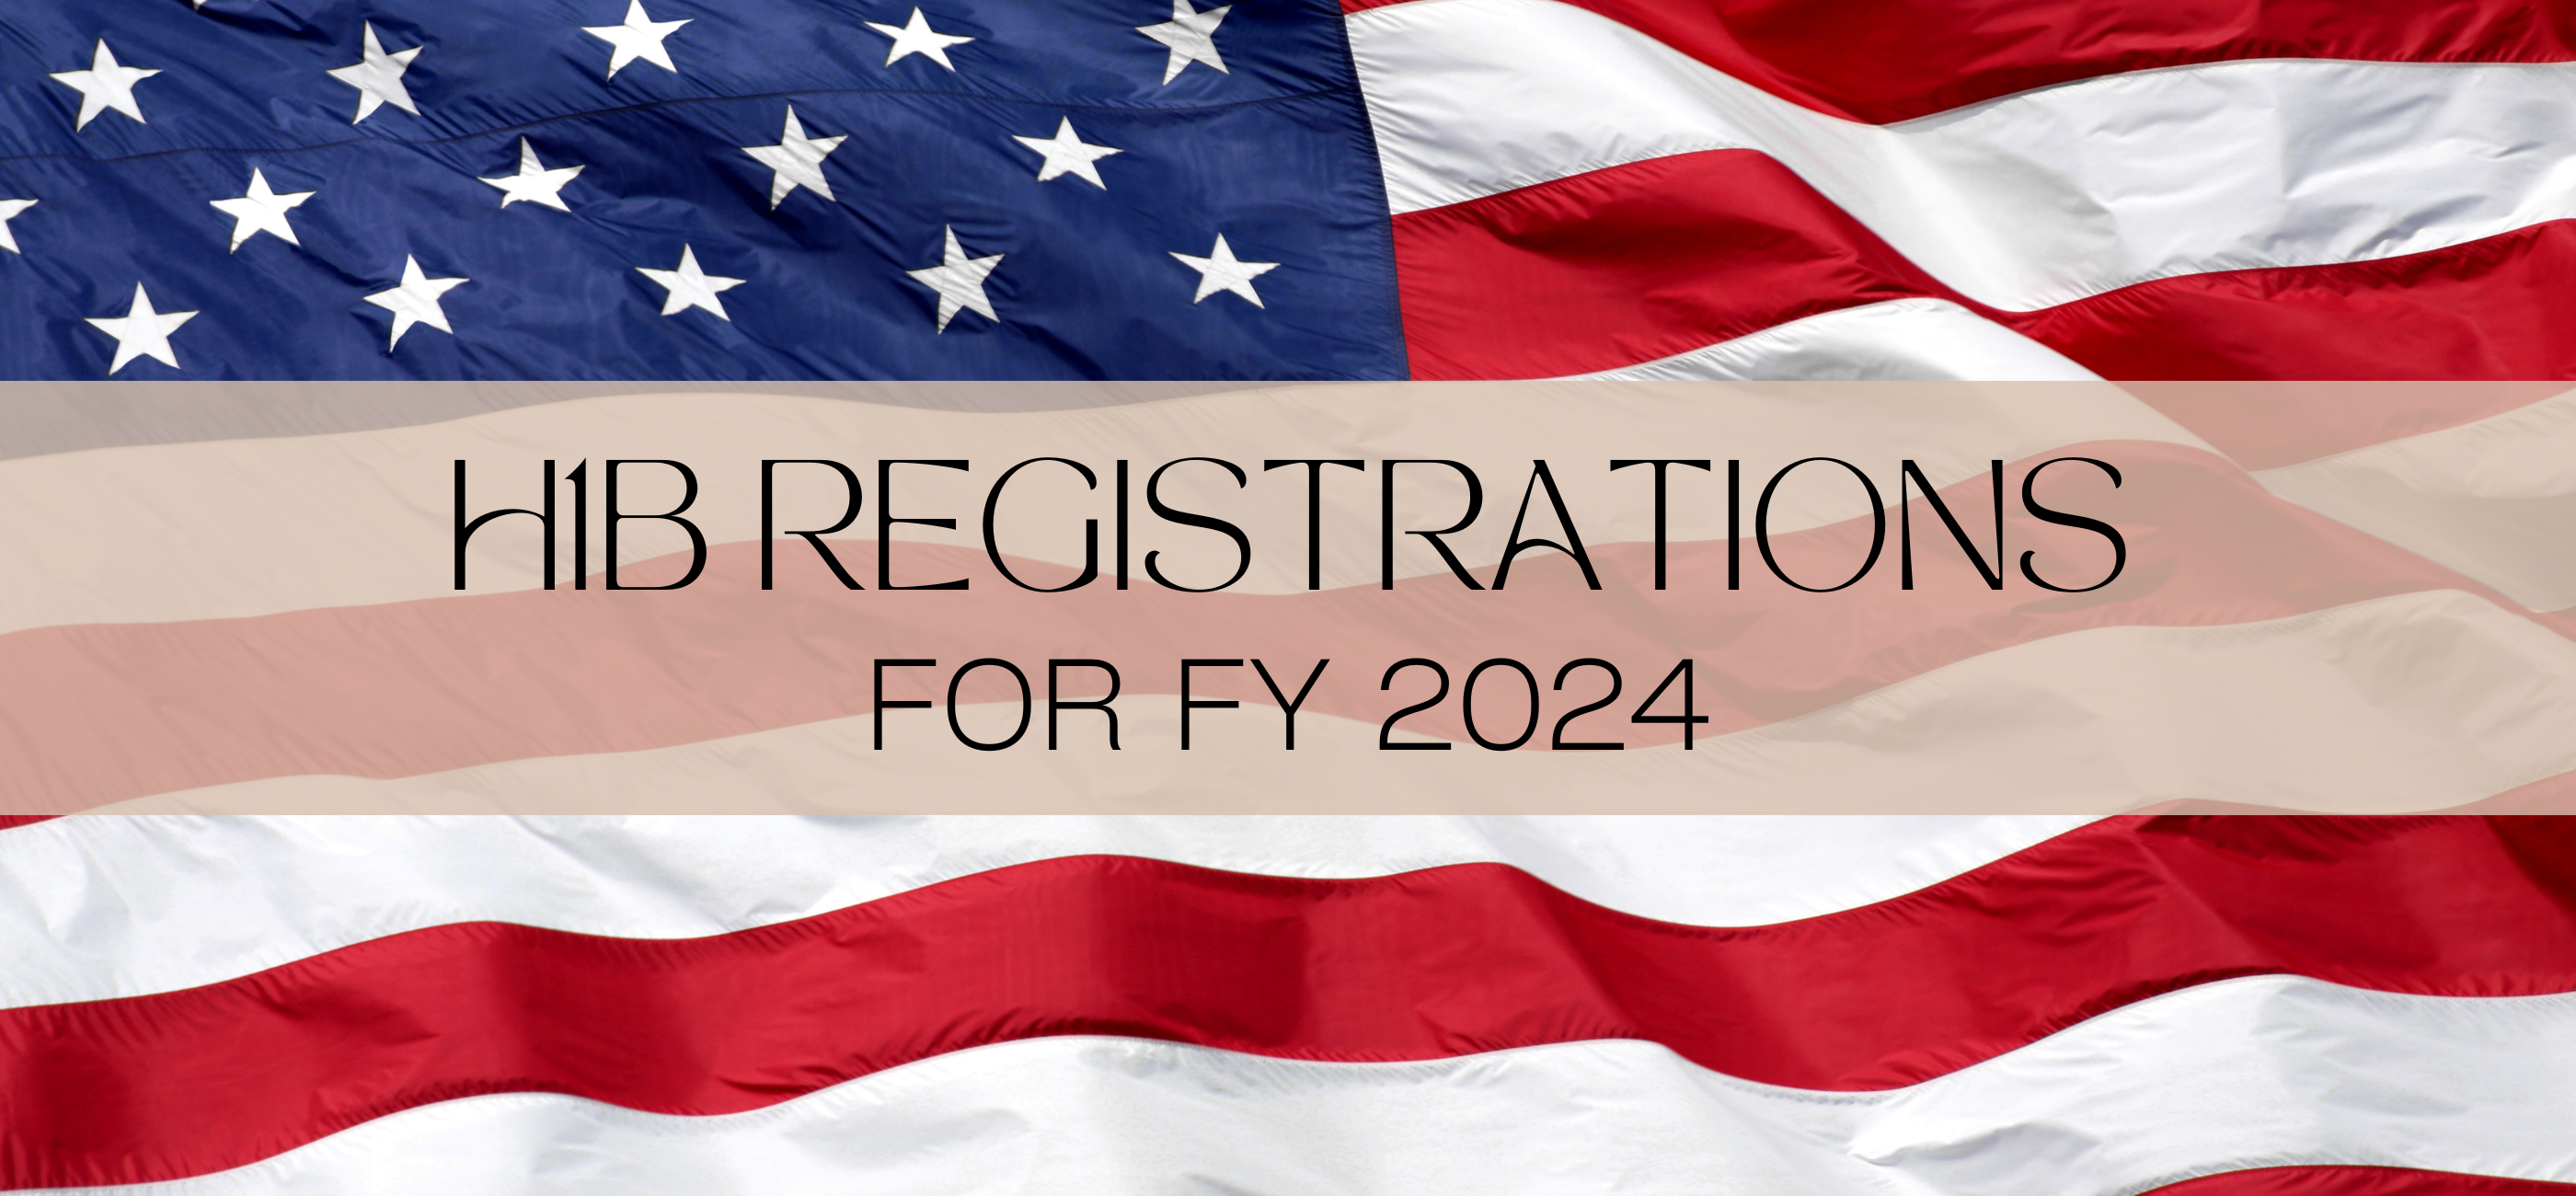 The US Citizenship and Immigration Services (USCIS) conducted the H1B Lottery for the fiscal year (FY) 2024 season during the last week of March 2023. Many have been eagerly waiting to know the total count of H1B registrations, how many were selected, and other common statistics related to the H1B Visa 2024 season. According to the latest data from USCIS, they have received 781,000 H1B registrations for the upcoming season.